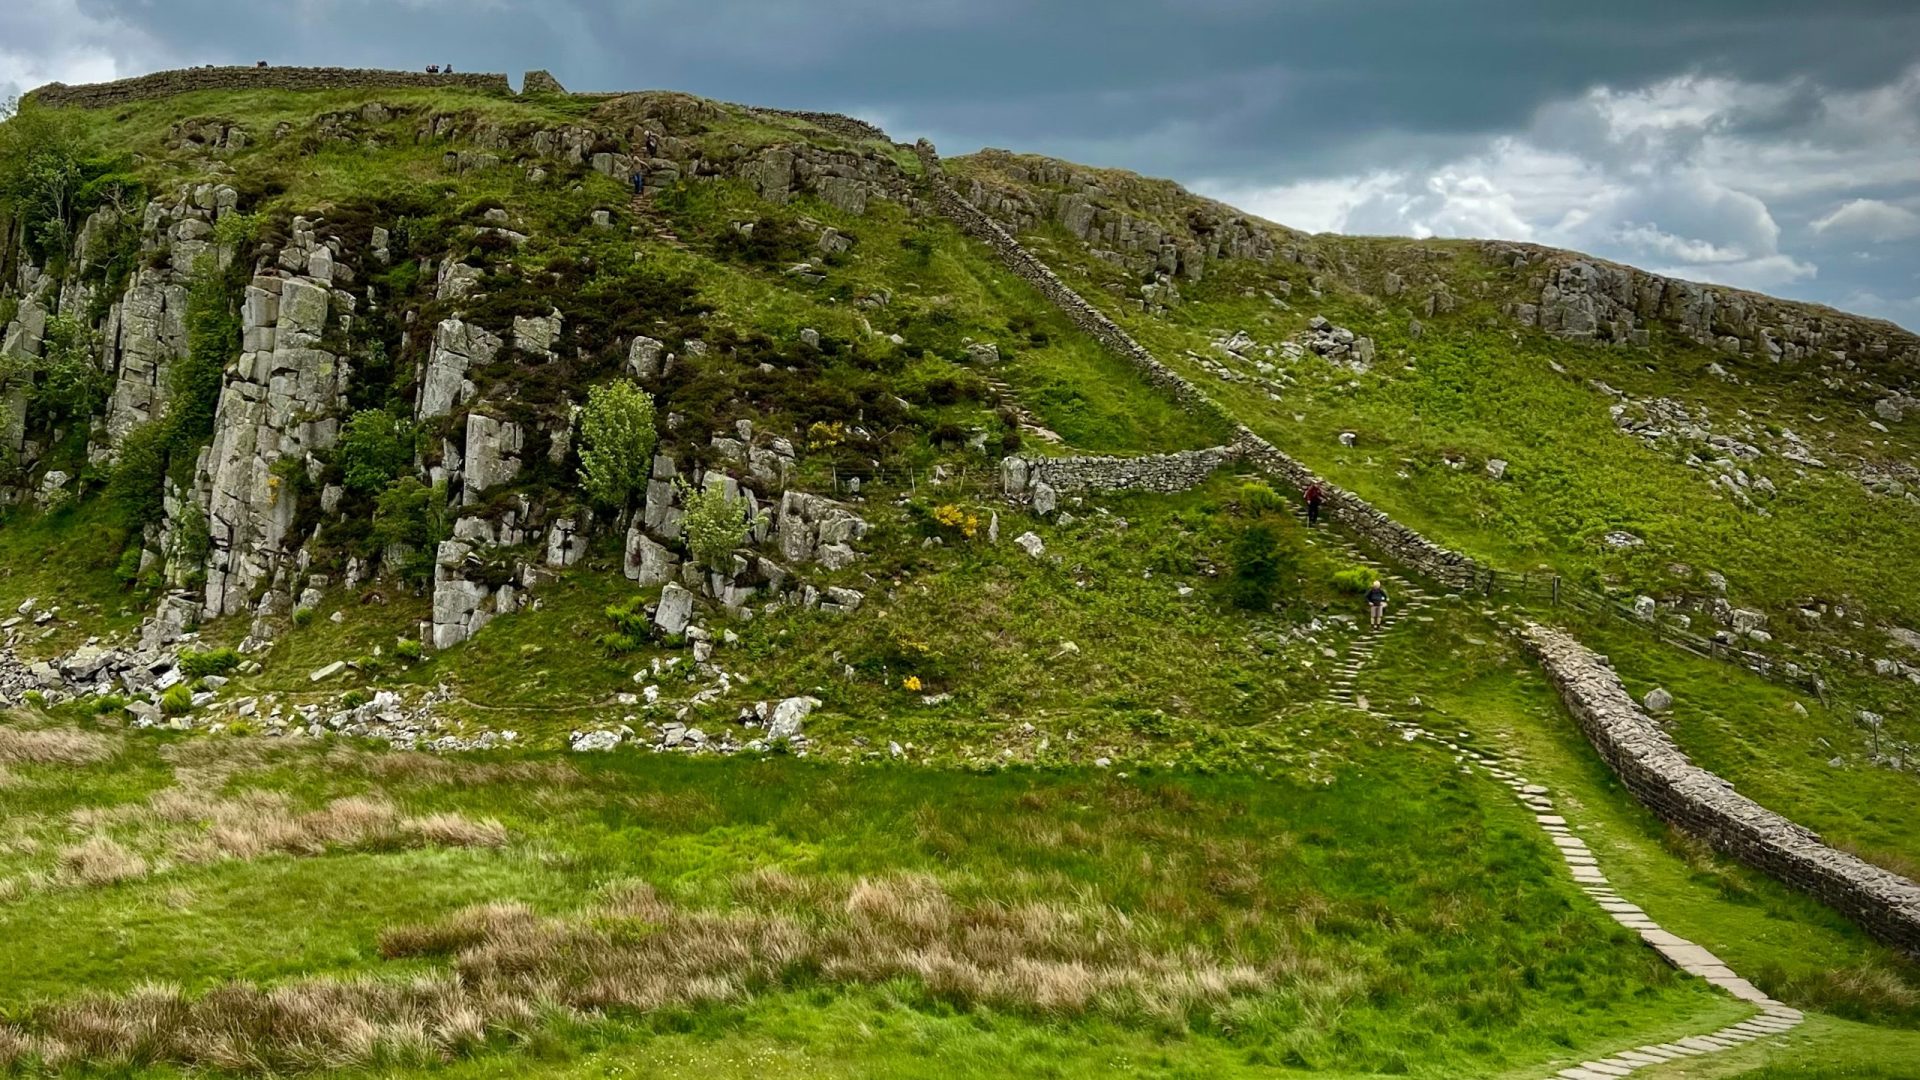 A view of Hadrian’s wall in Northumberland as it runs up a craggy hillside of a Roman fortification